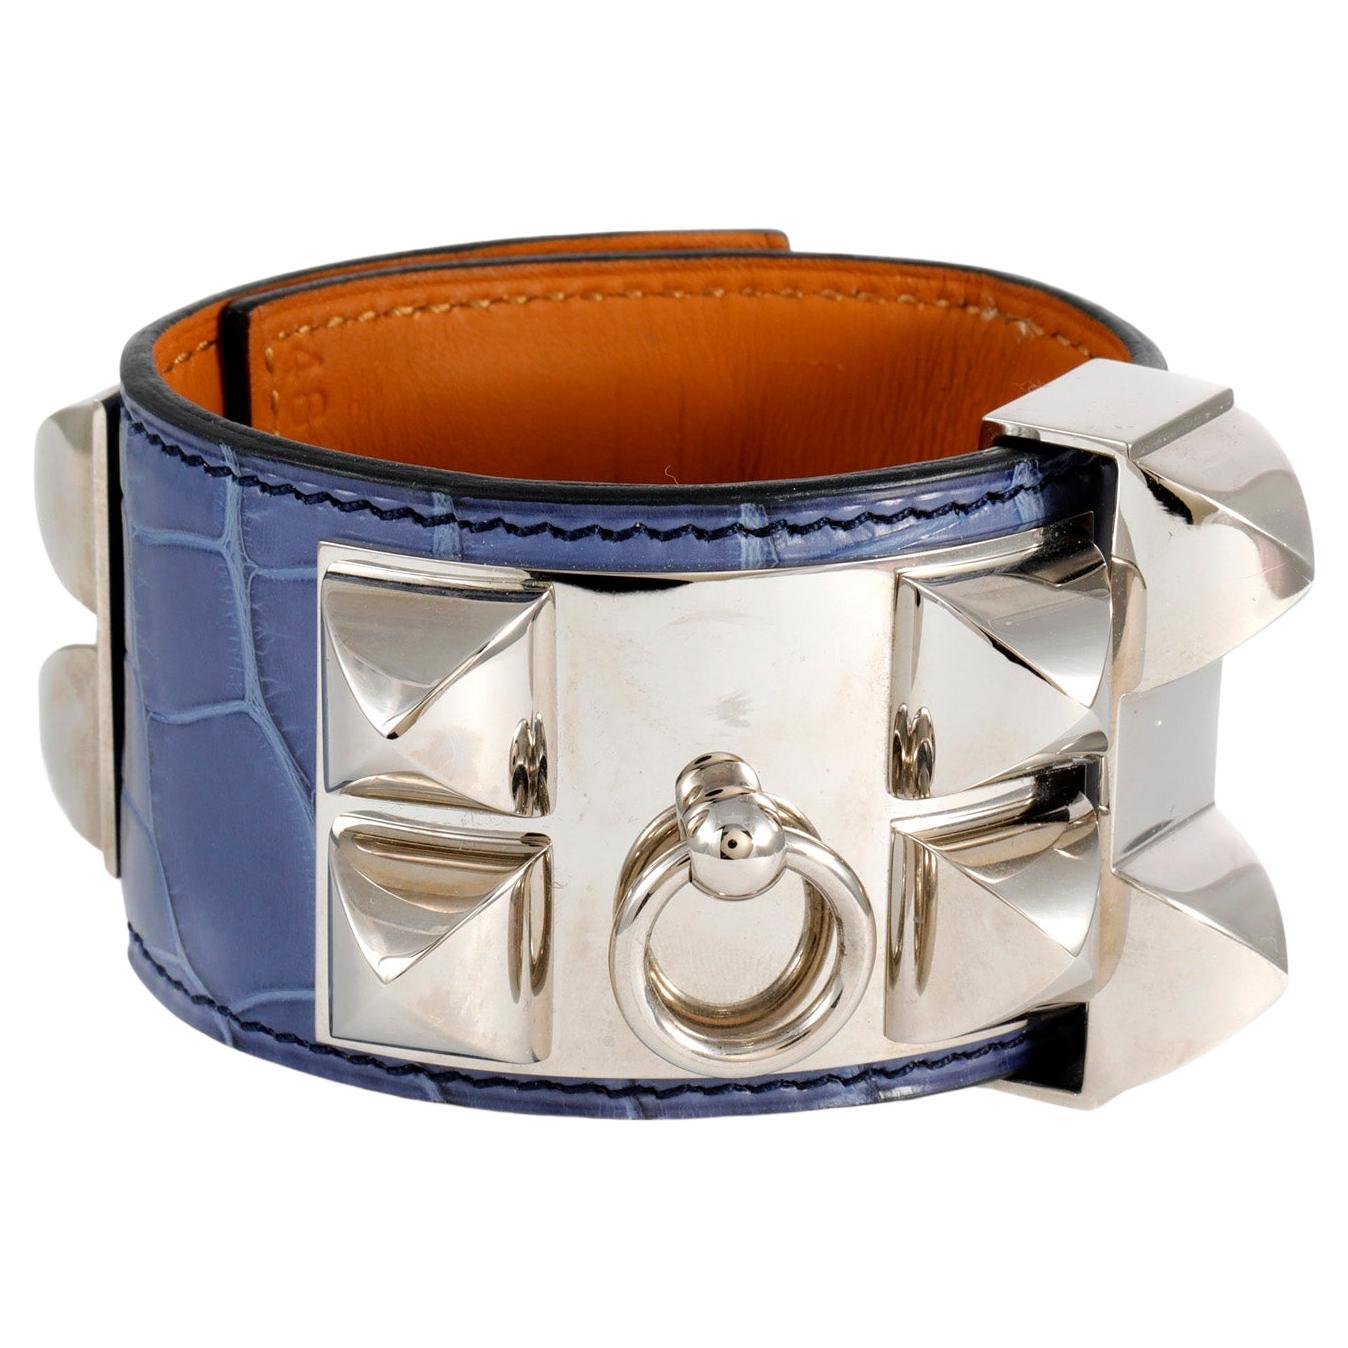 Fake Hermes Latest Style Pyramid Bracelets Good Reviews For Sale